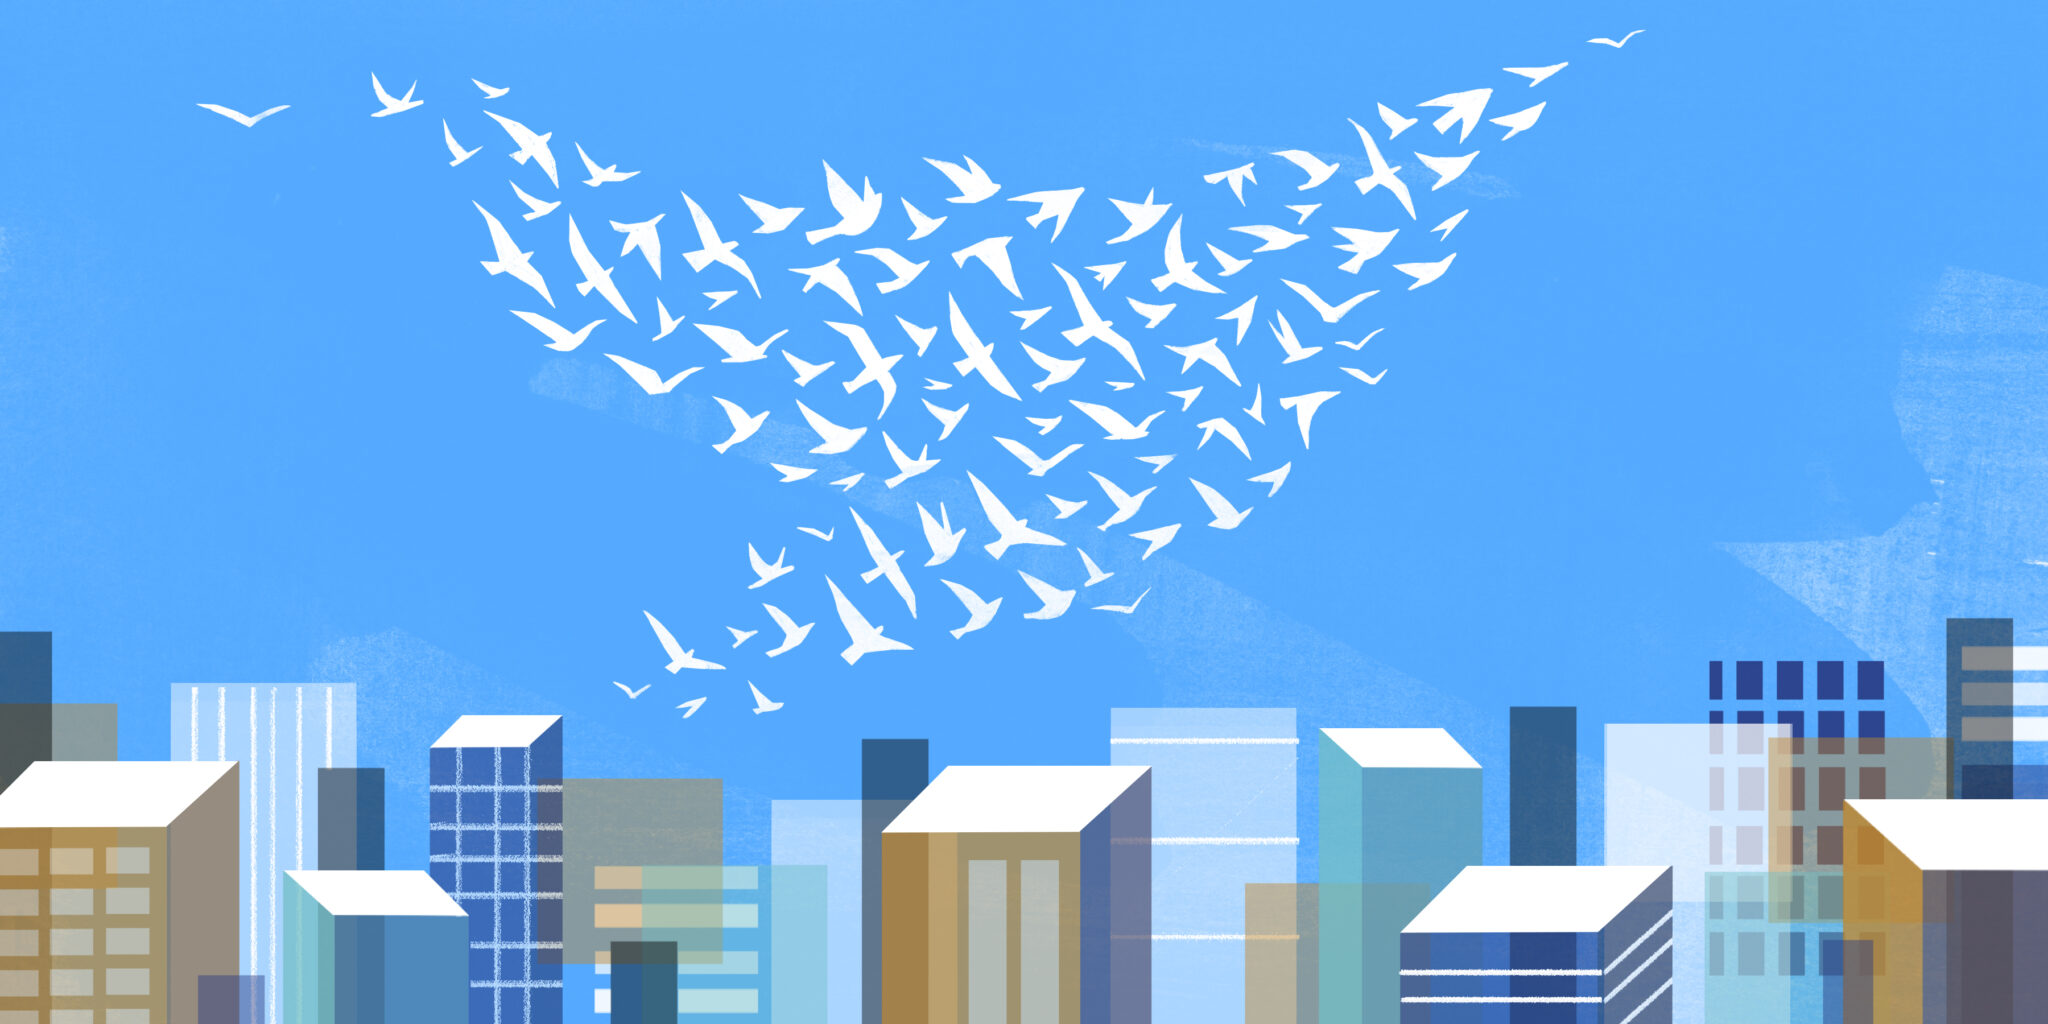 The principles of complexity, as depicted through a city landscape and a flock of birds.